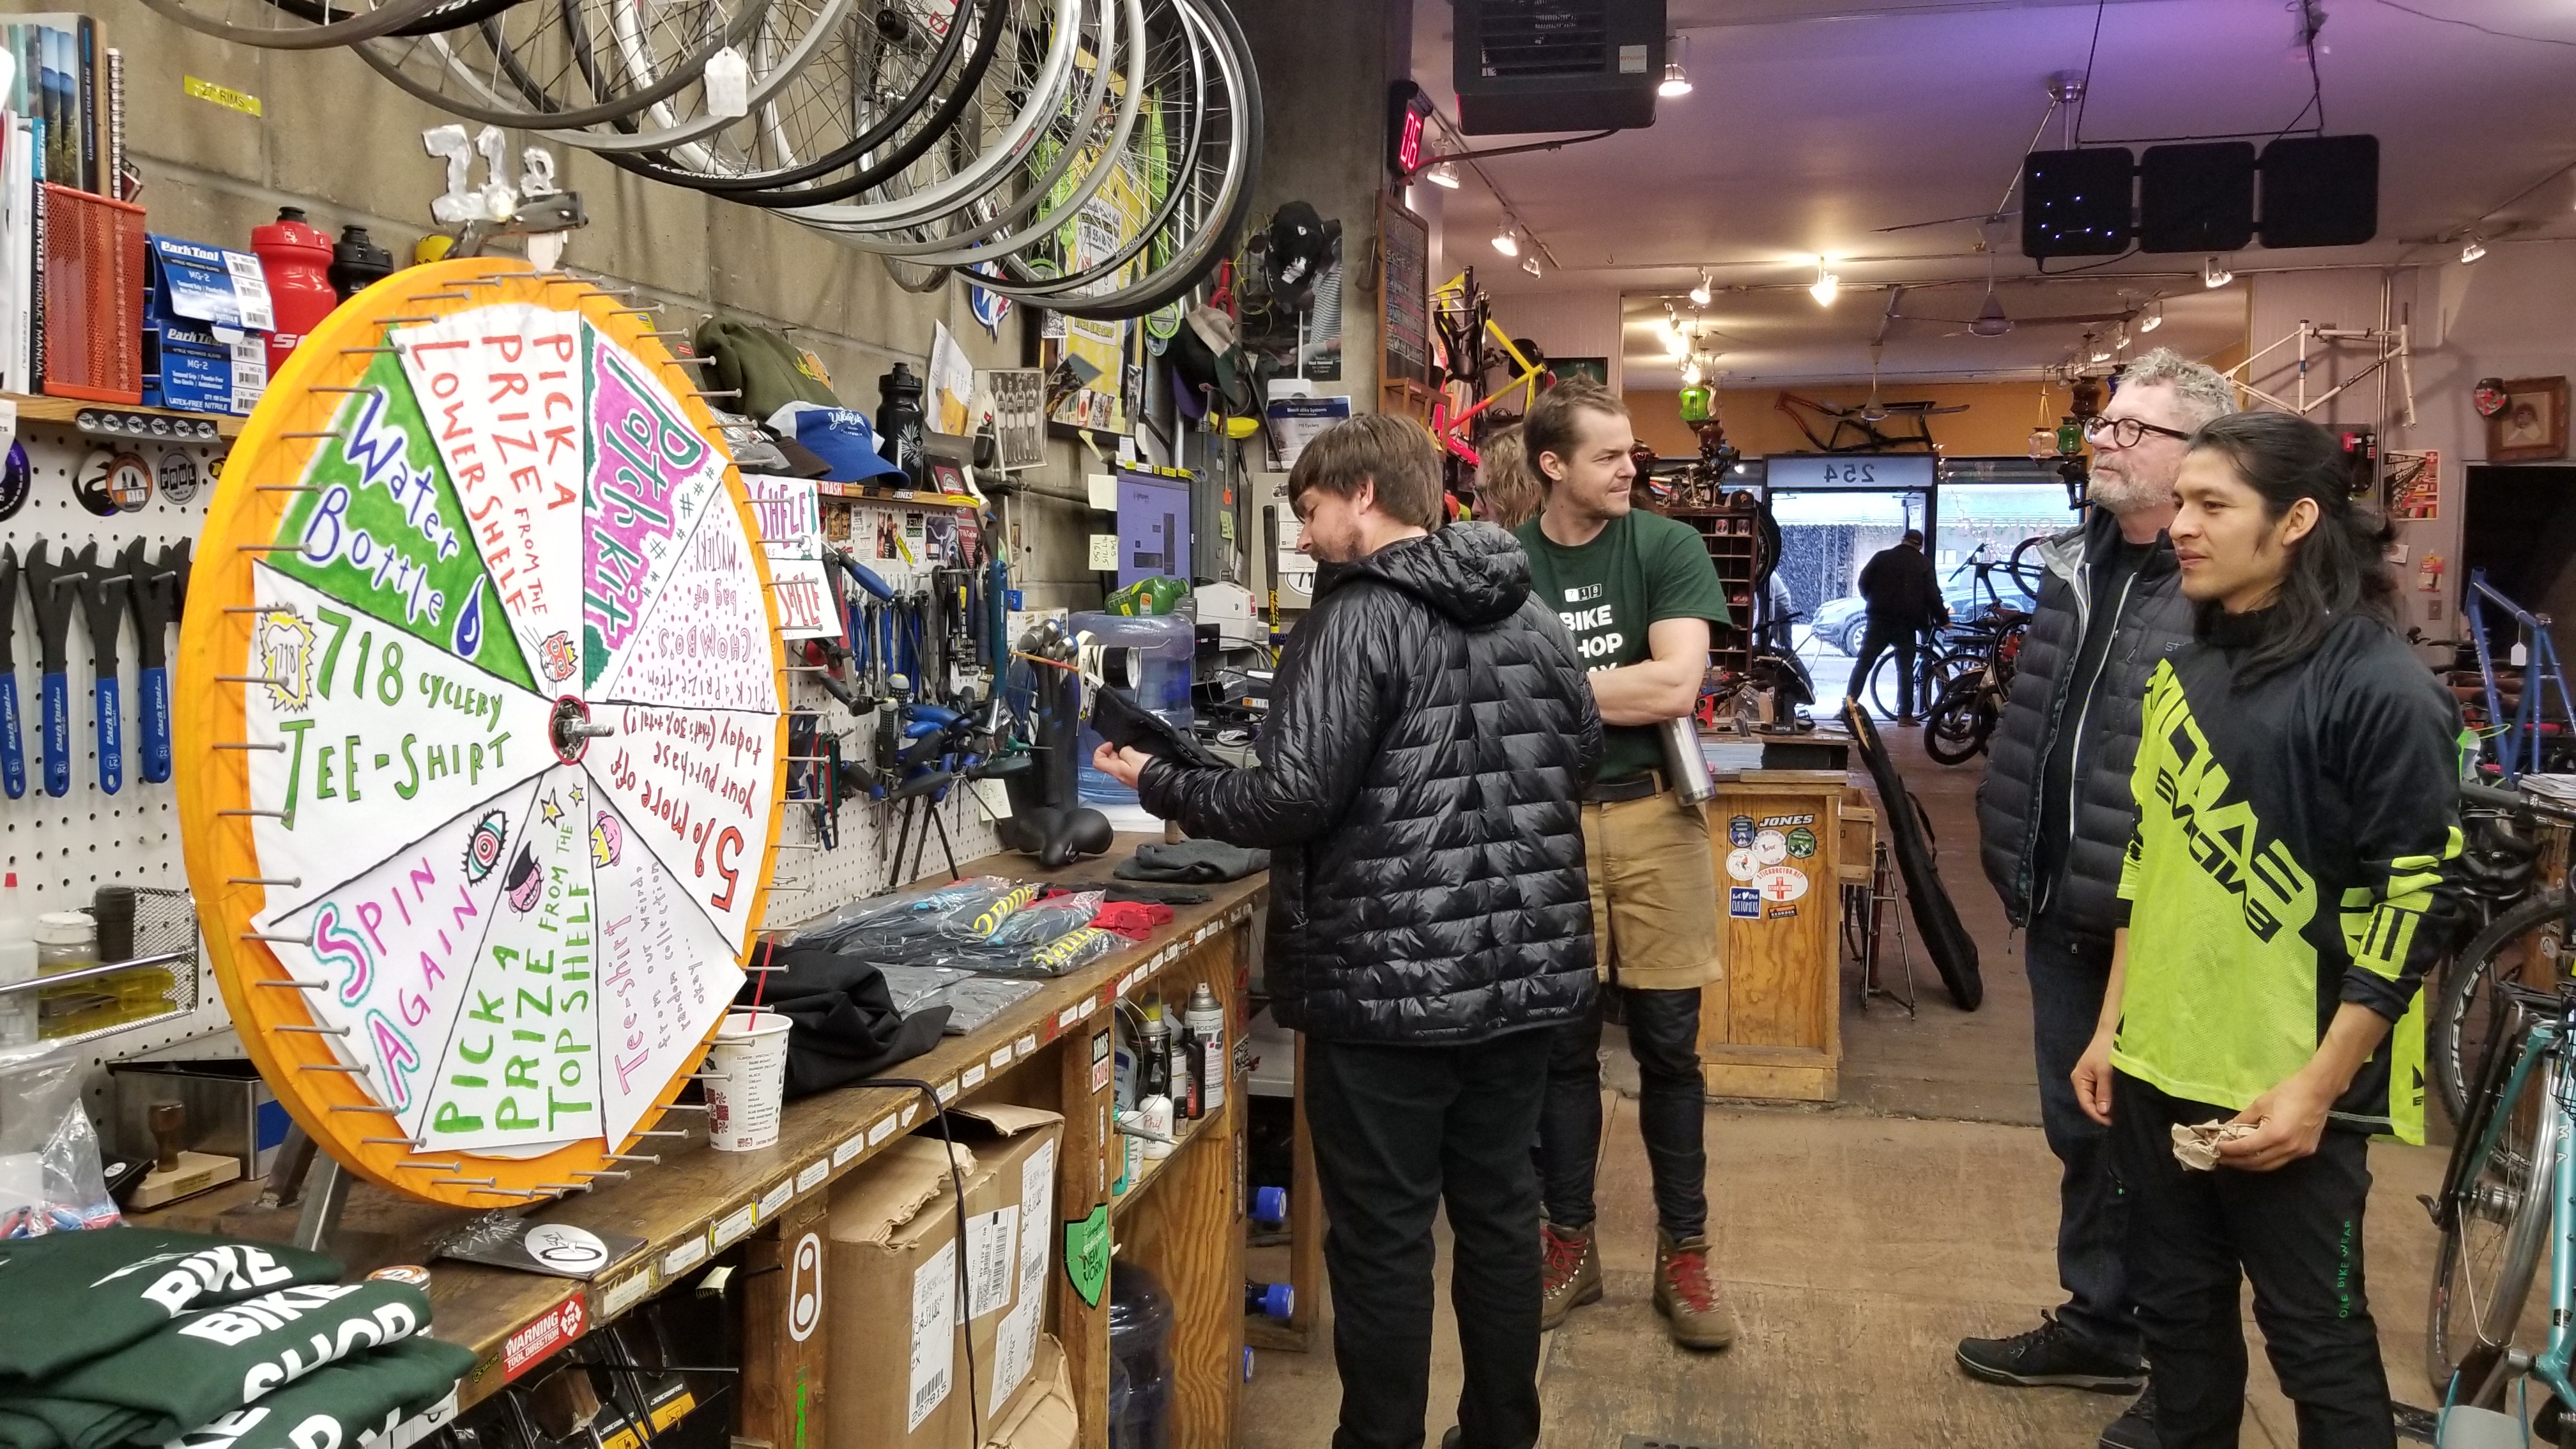 Bike Shop Day seeks to bring communities together through cycling ... - 20171209 095504